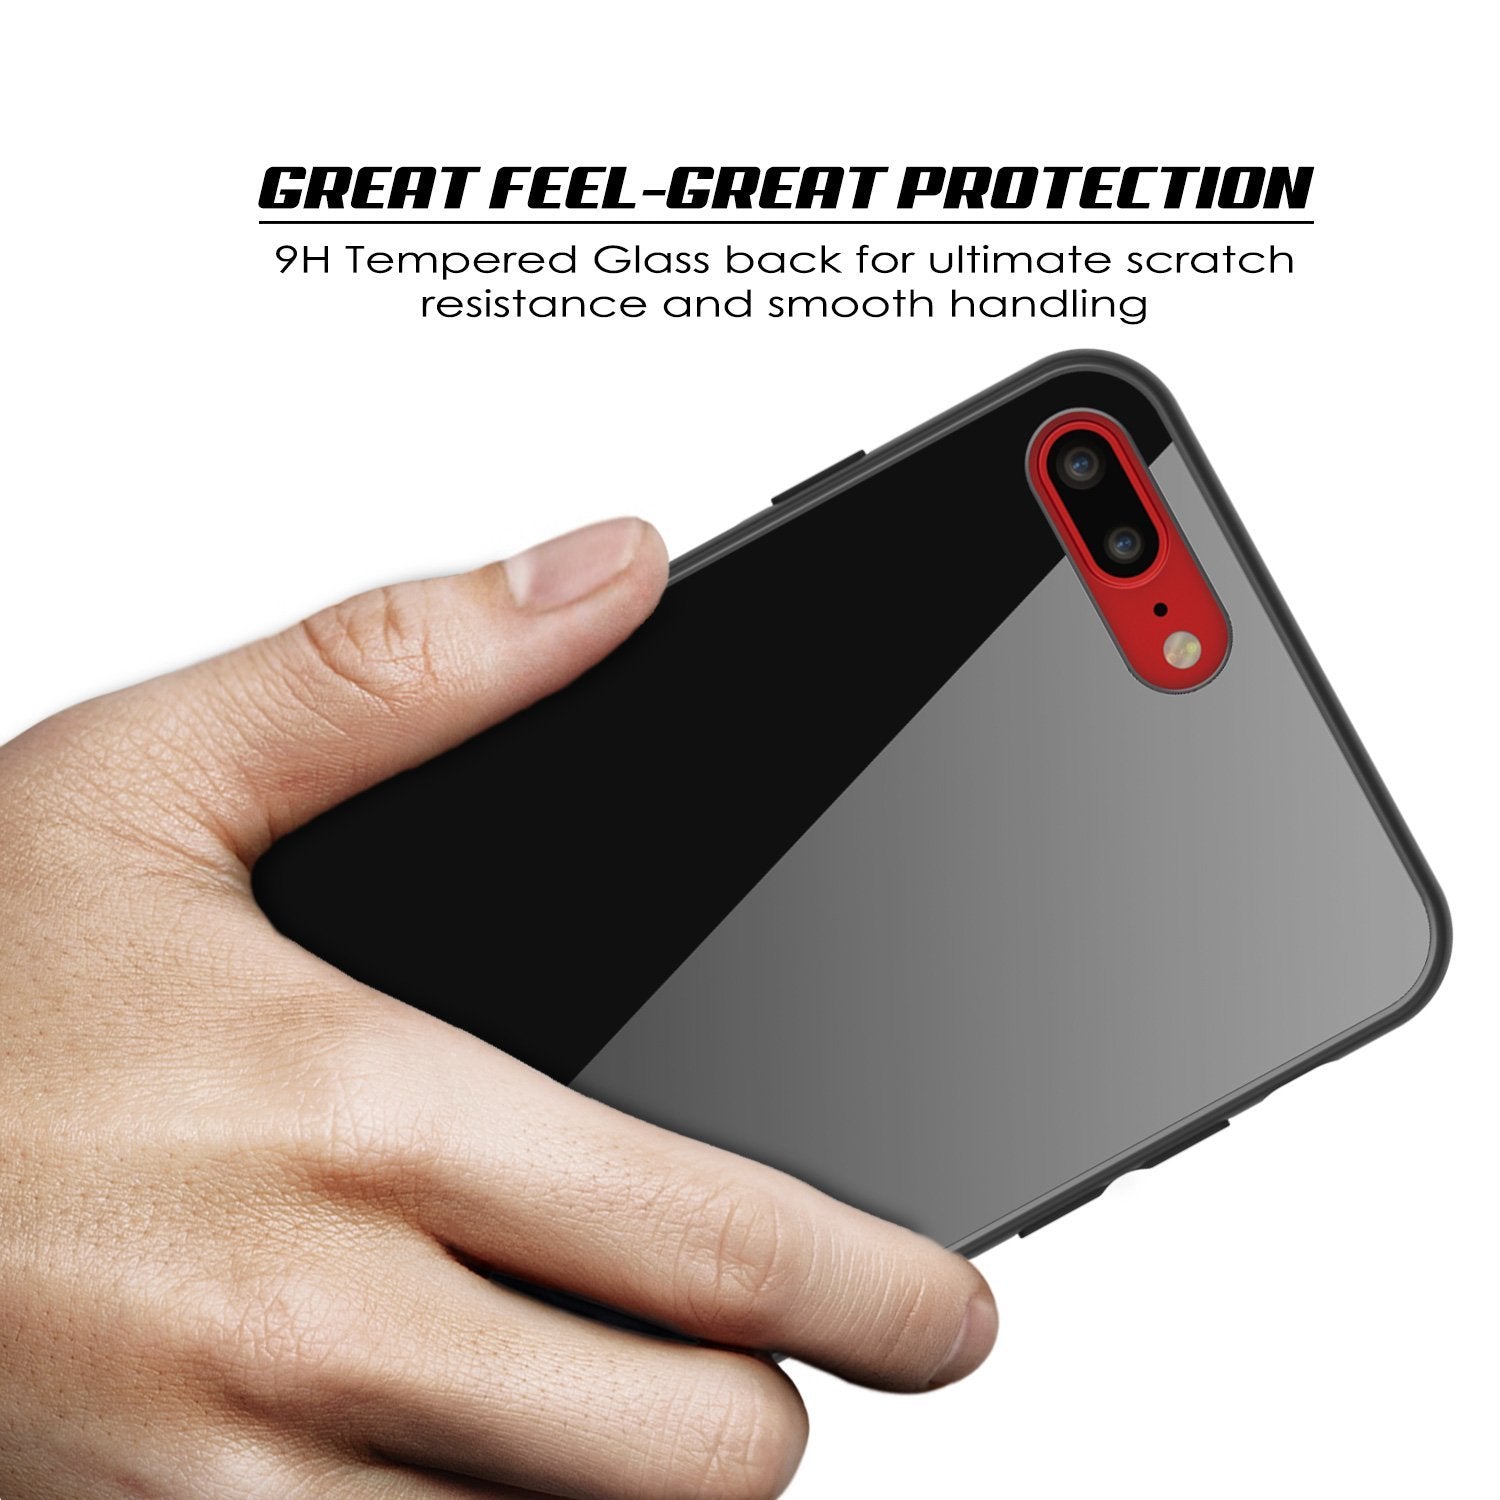 iPhone 8 PLUS Case, Punkcase GlassShield Ultra Thin Protective 9H Full Body Tempered Glass Cover W/ Drop Protection & Non Slip Grip for Apple iPhone 7 PLUS / Apple iPhone 8 PLUS (Black) - PunkCase NZ